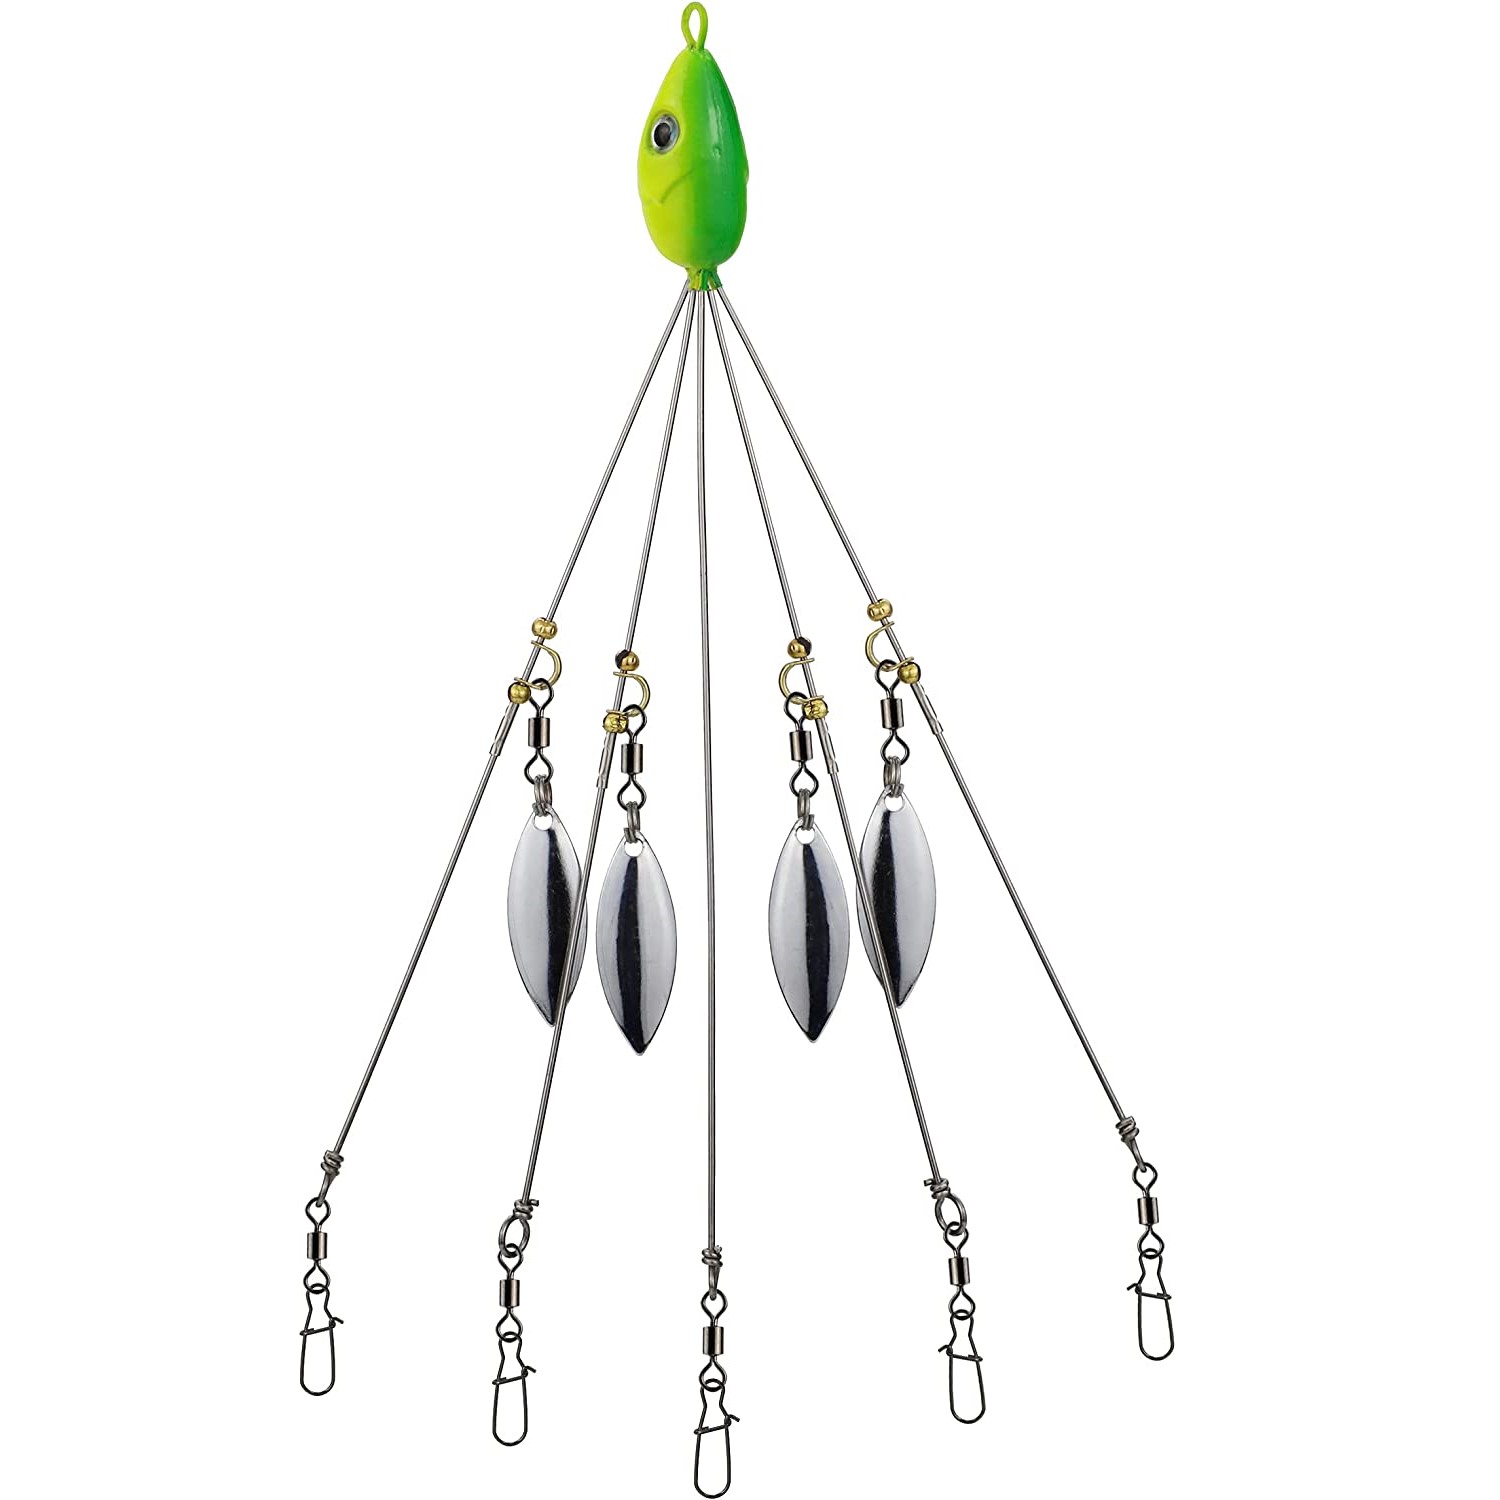 Willow Spinner Umbrella Lure Rigs: Catch More Fish in Freshwater &  Saltwater with Bass & Trout!